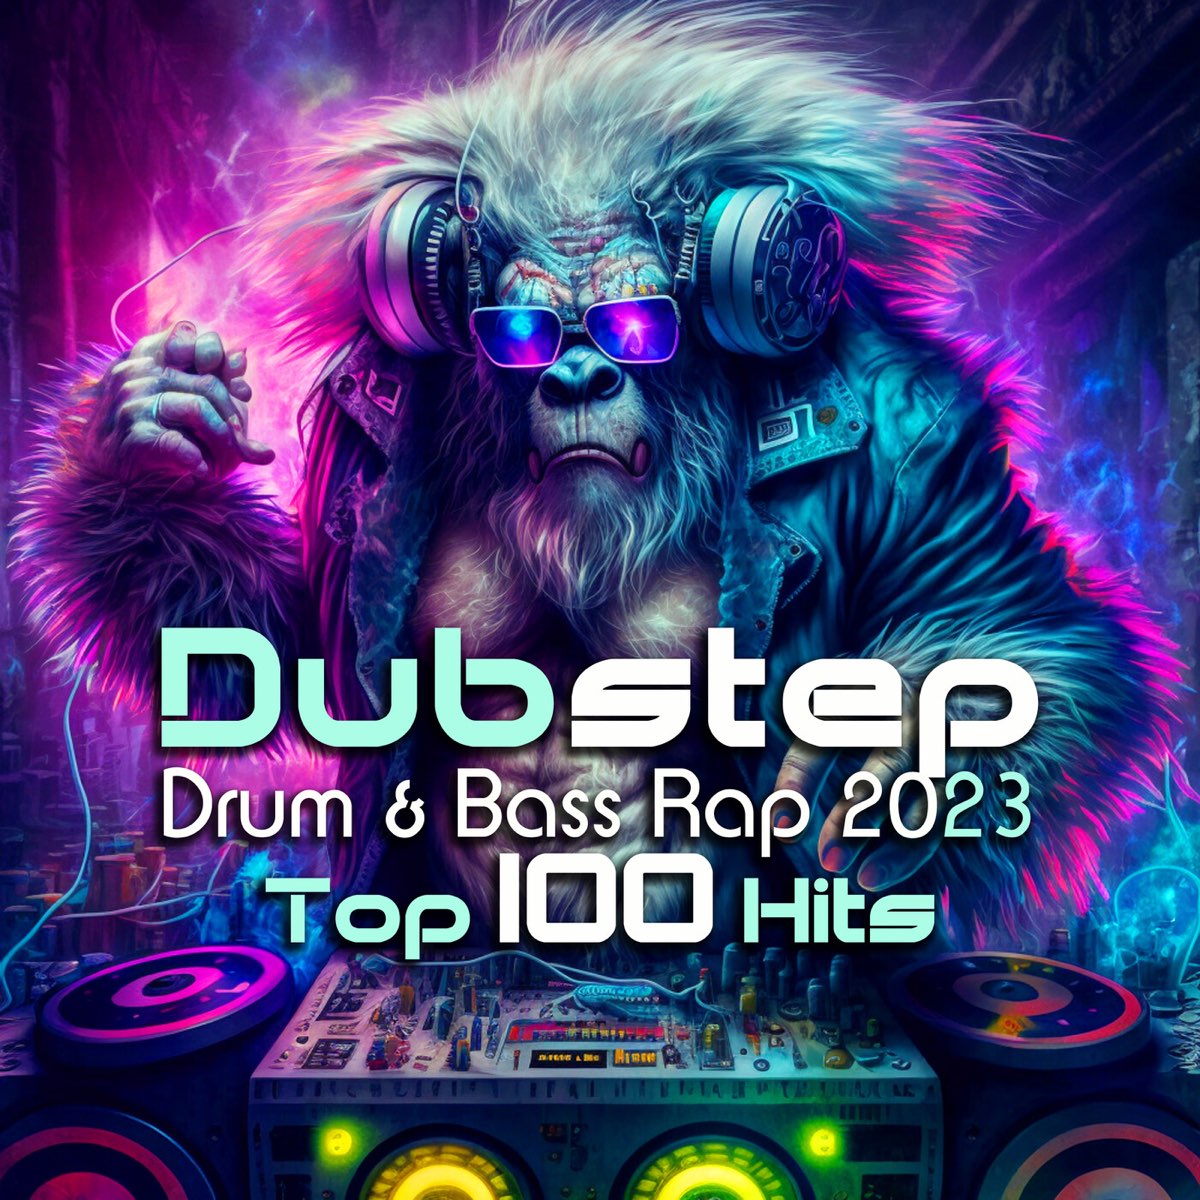 Cosmic bass. Top Hits 2023. Trance 2022 Top 100 Hits DOCTORSPOOK.